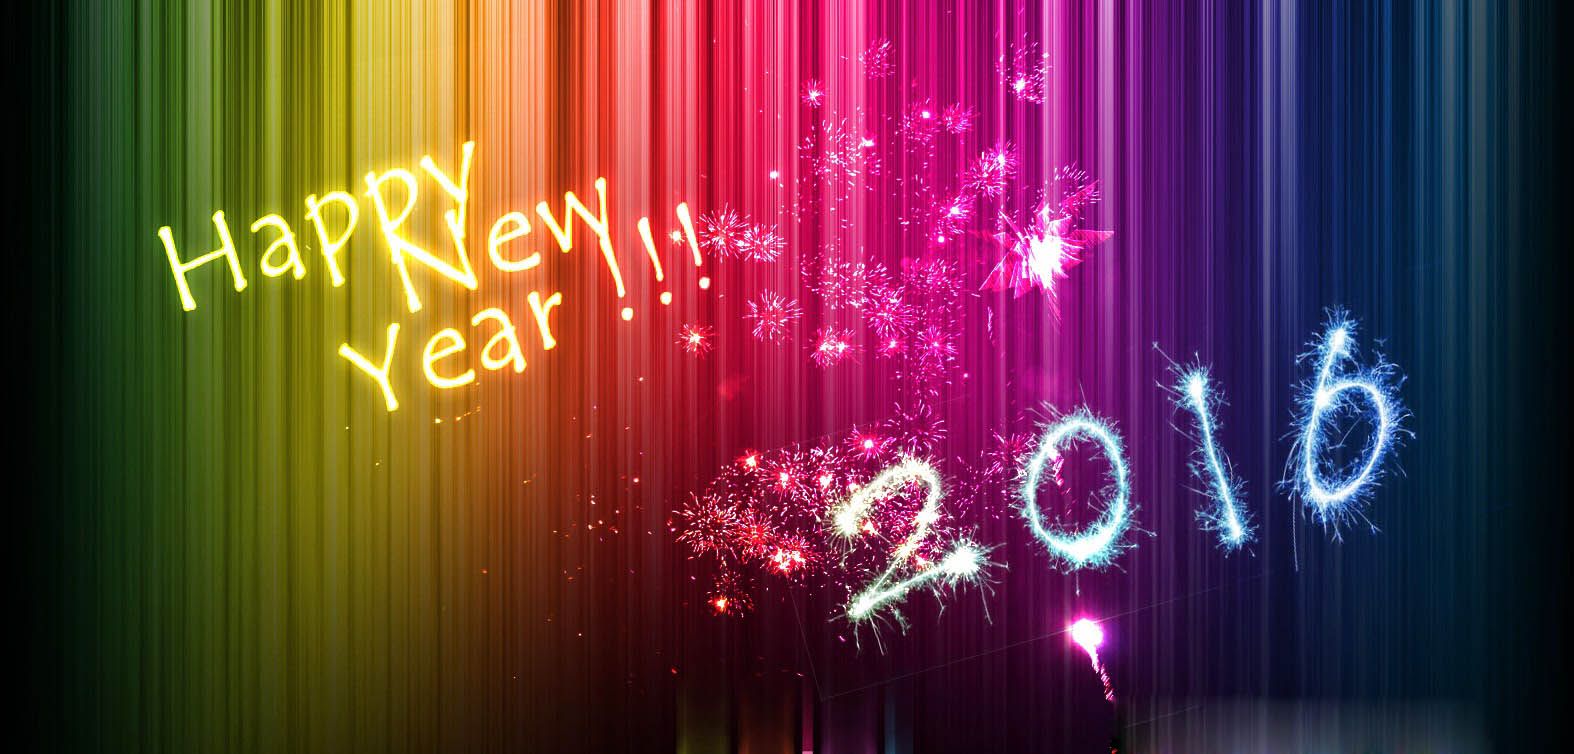 Happy New Year Images HD 2016 free download | Wallpapers ...